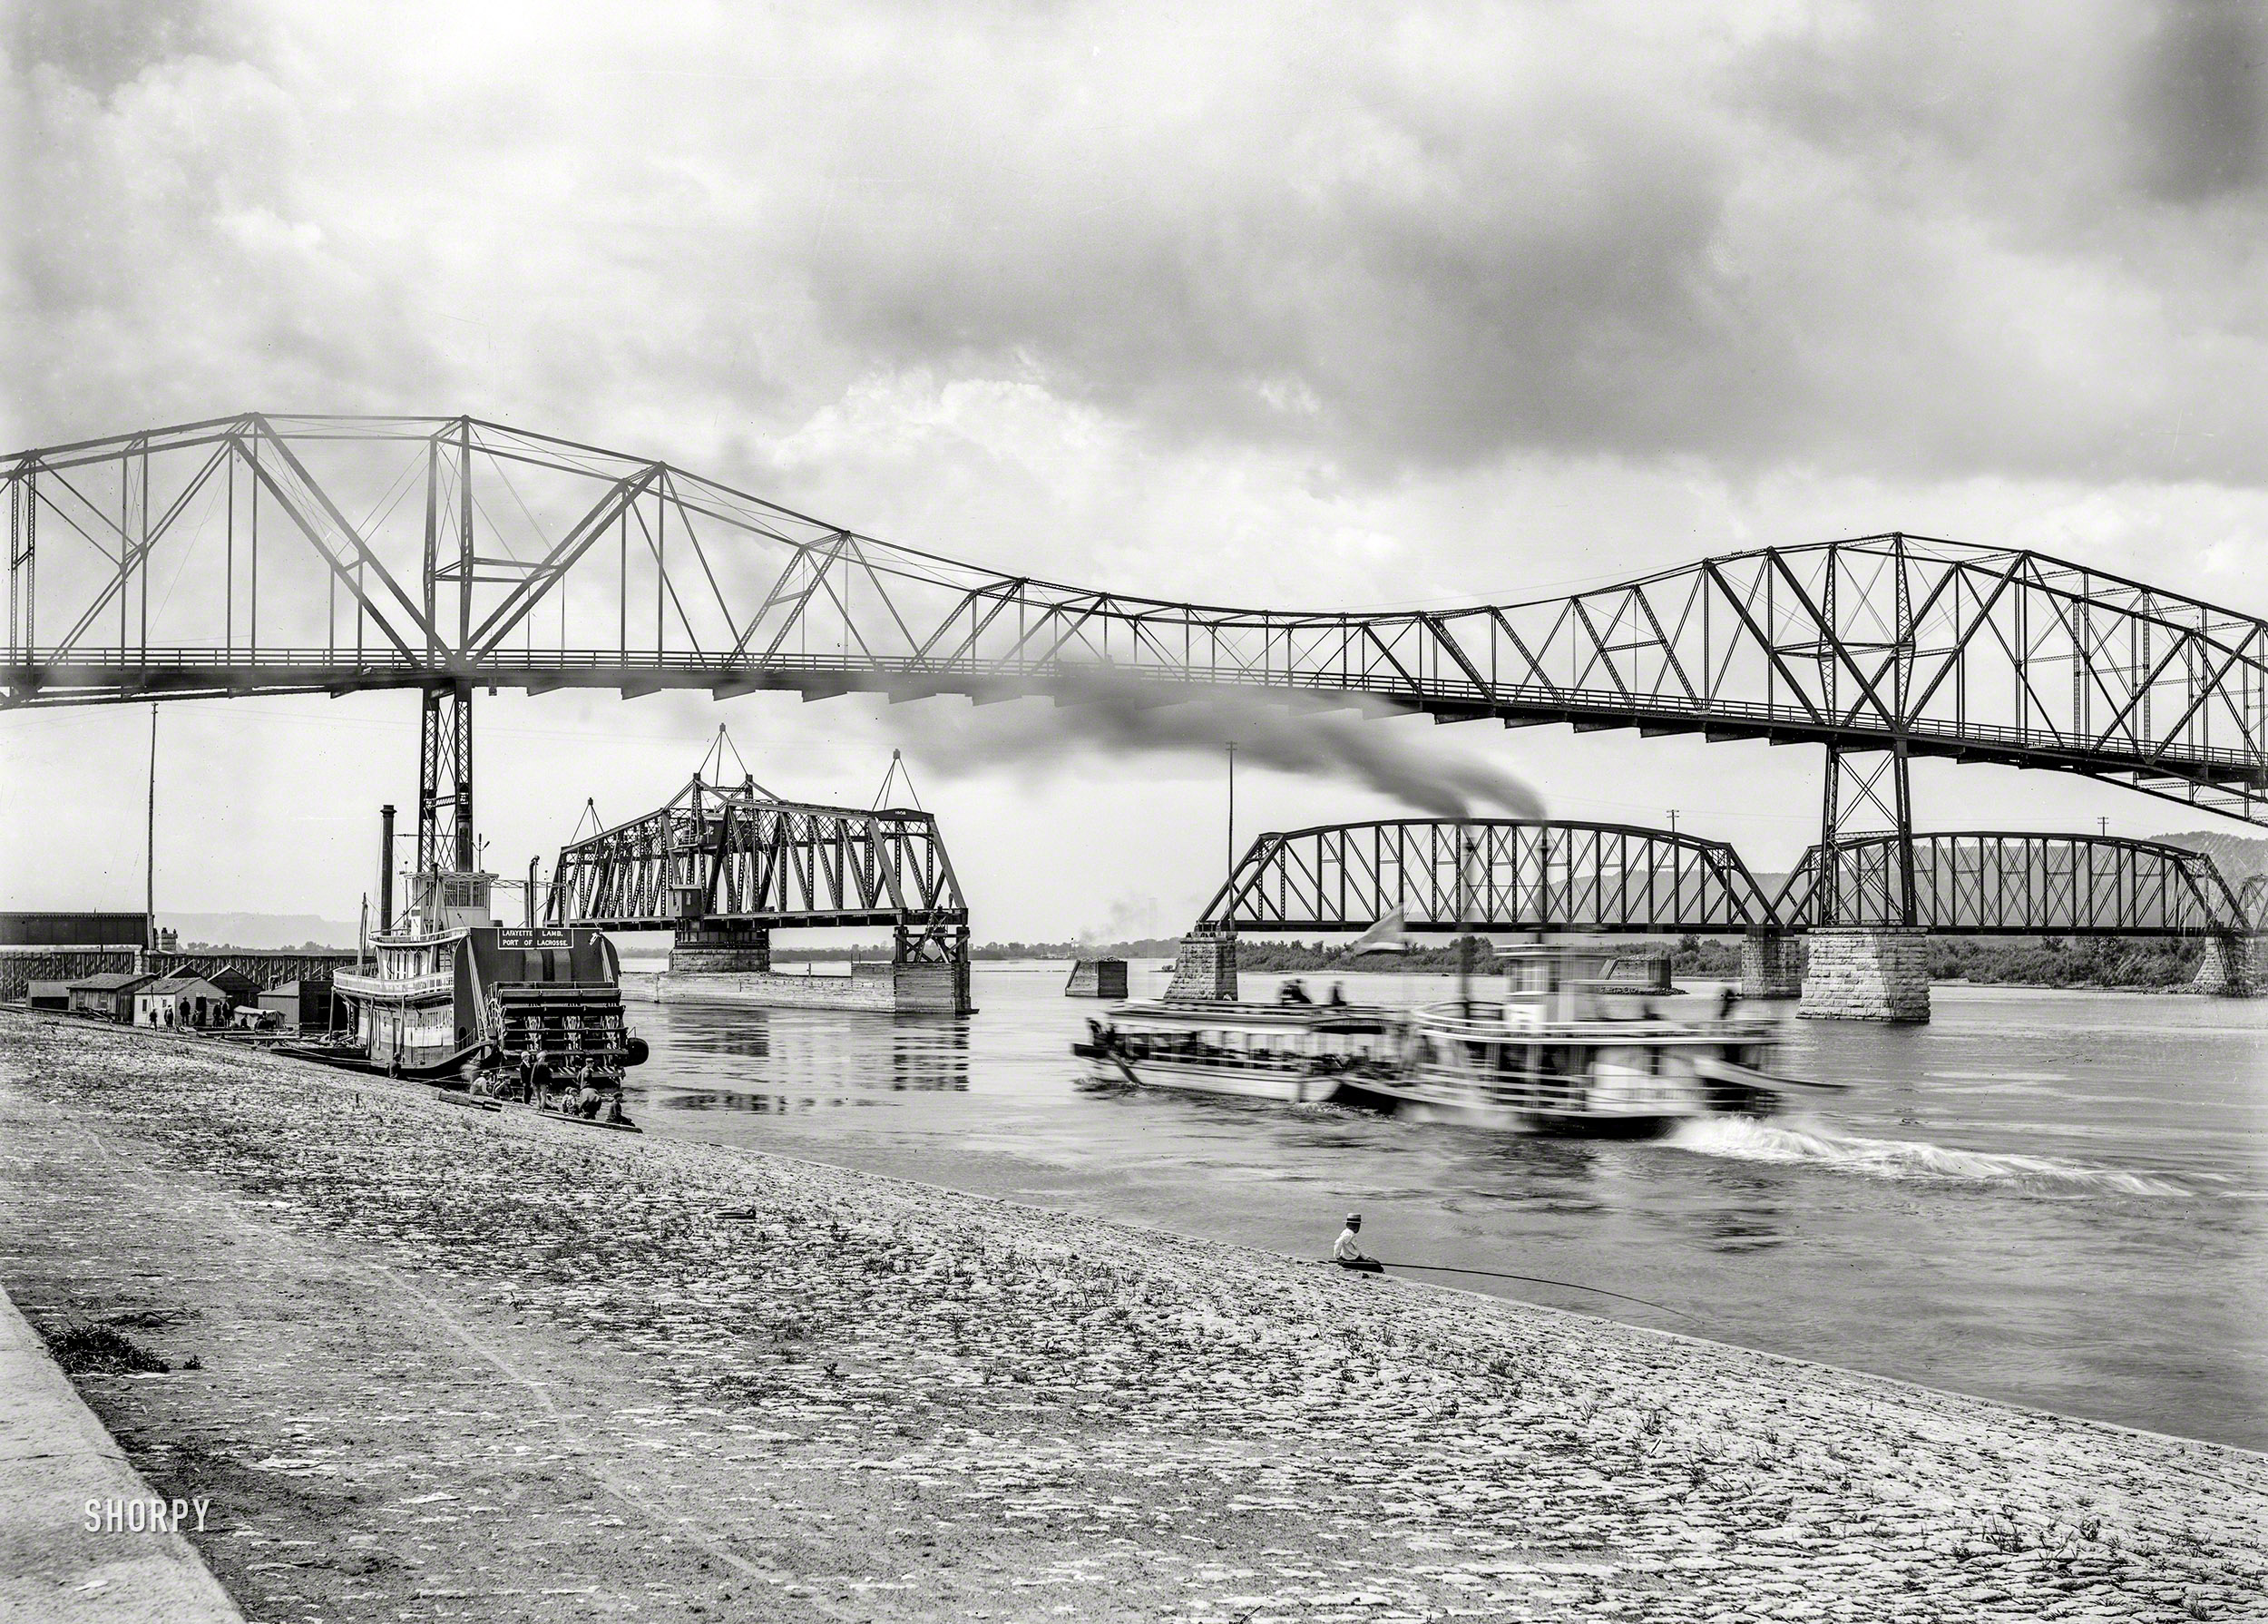 The Mississippi River circa 1898. "Winona, Minnesota. The levee below the bridge." At left, the sternwheeler Lafayette Lamb. 8x10 inch dry plate glass negative, Detroit Photgraphic Company. View full size.